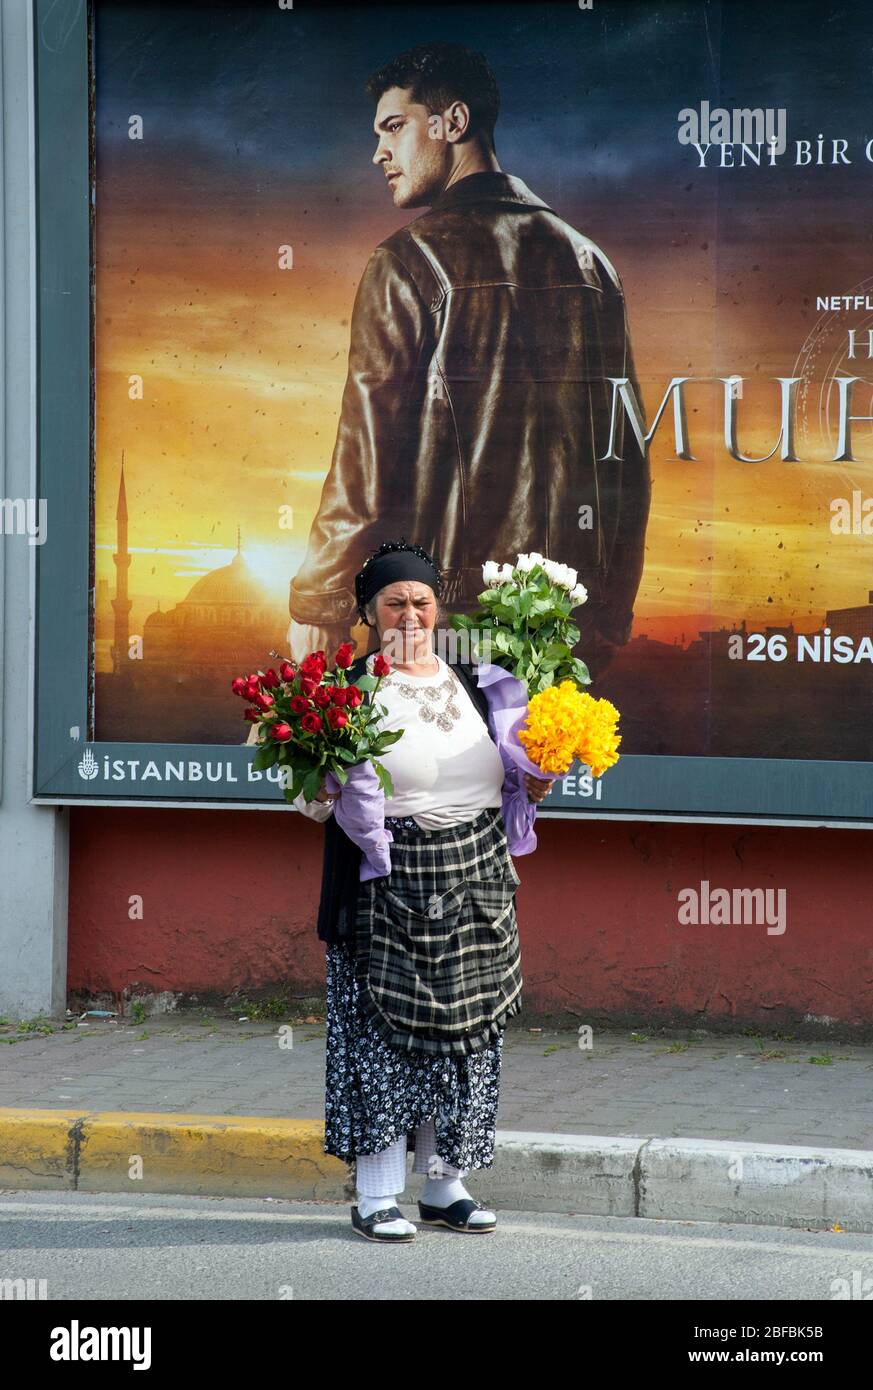 Gypsy woman selling flowers in front of outdoor advertising poster in streets of Istanbul, Turkey Stock Photo